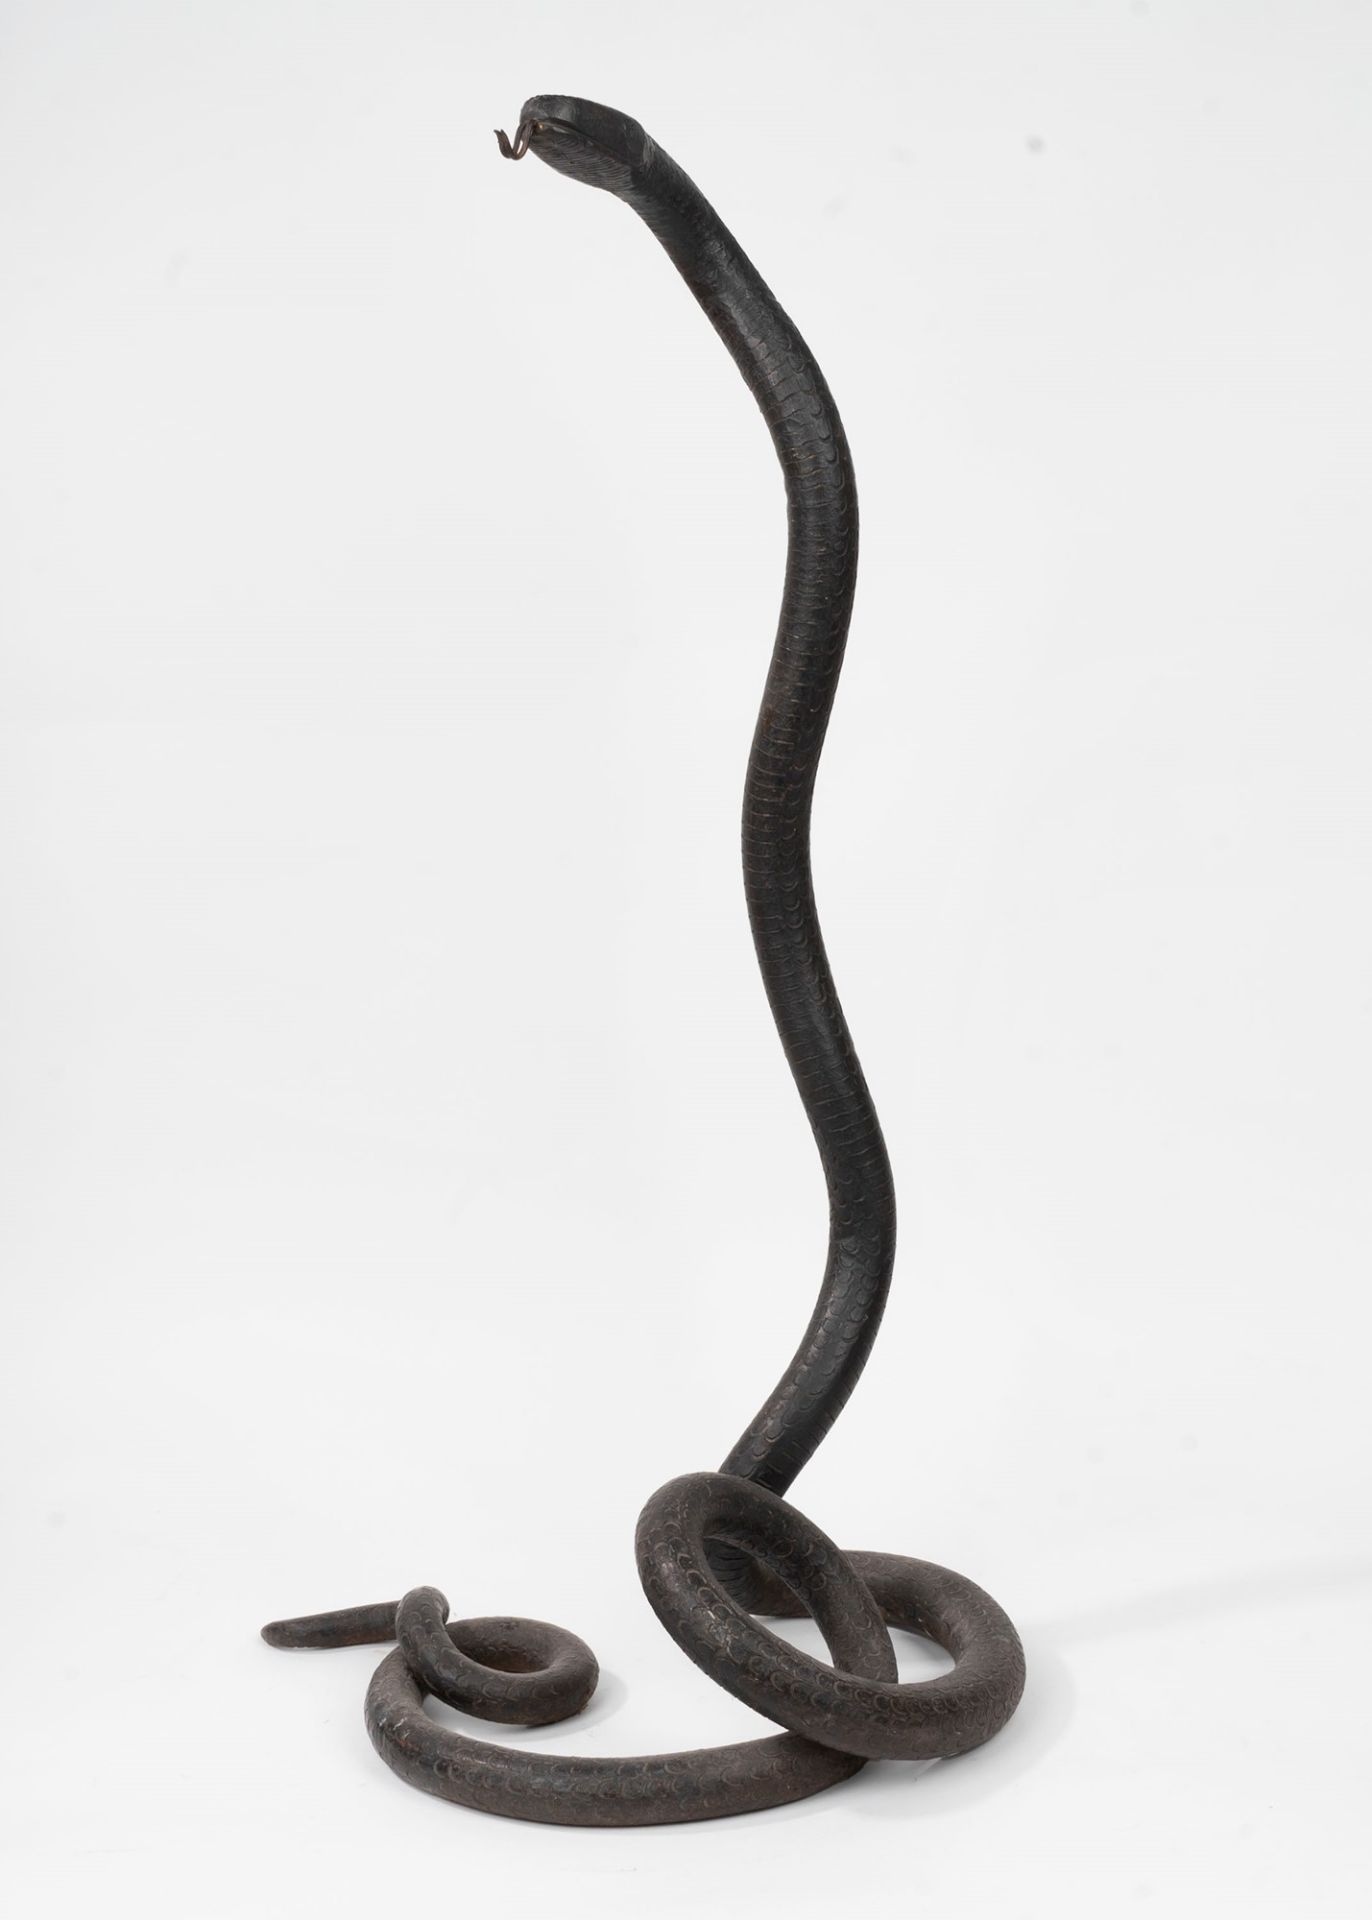 Iron sculpture depicting a snake, early 20th century